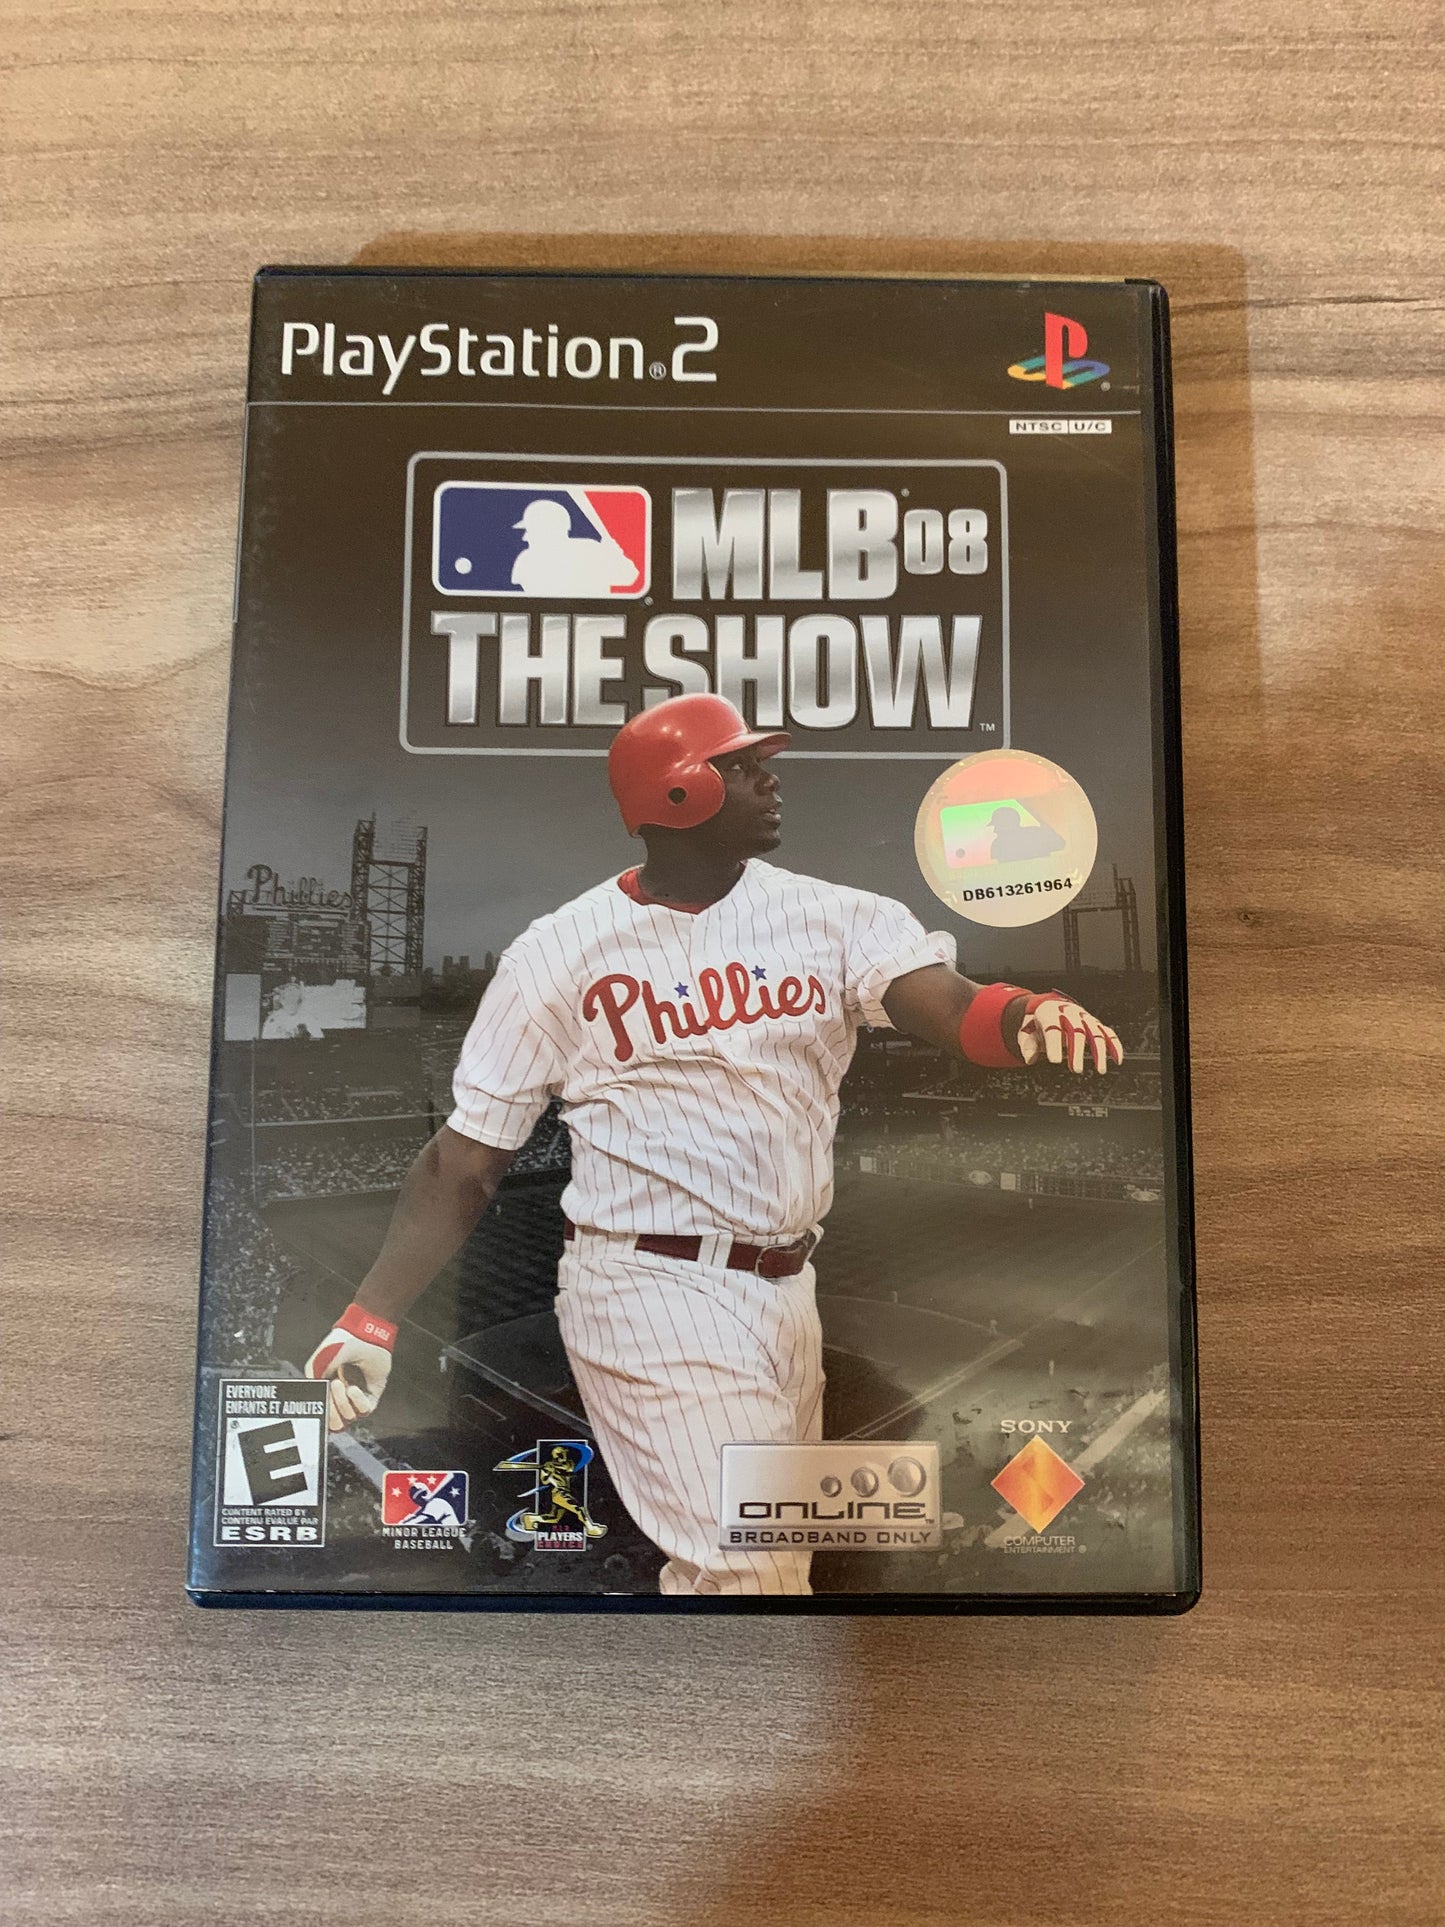 SONY PLAYSTATiON 2 [PS2] | MLB 08 THE SHOW